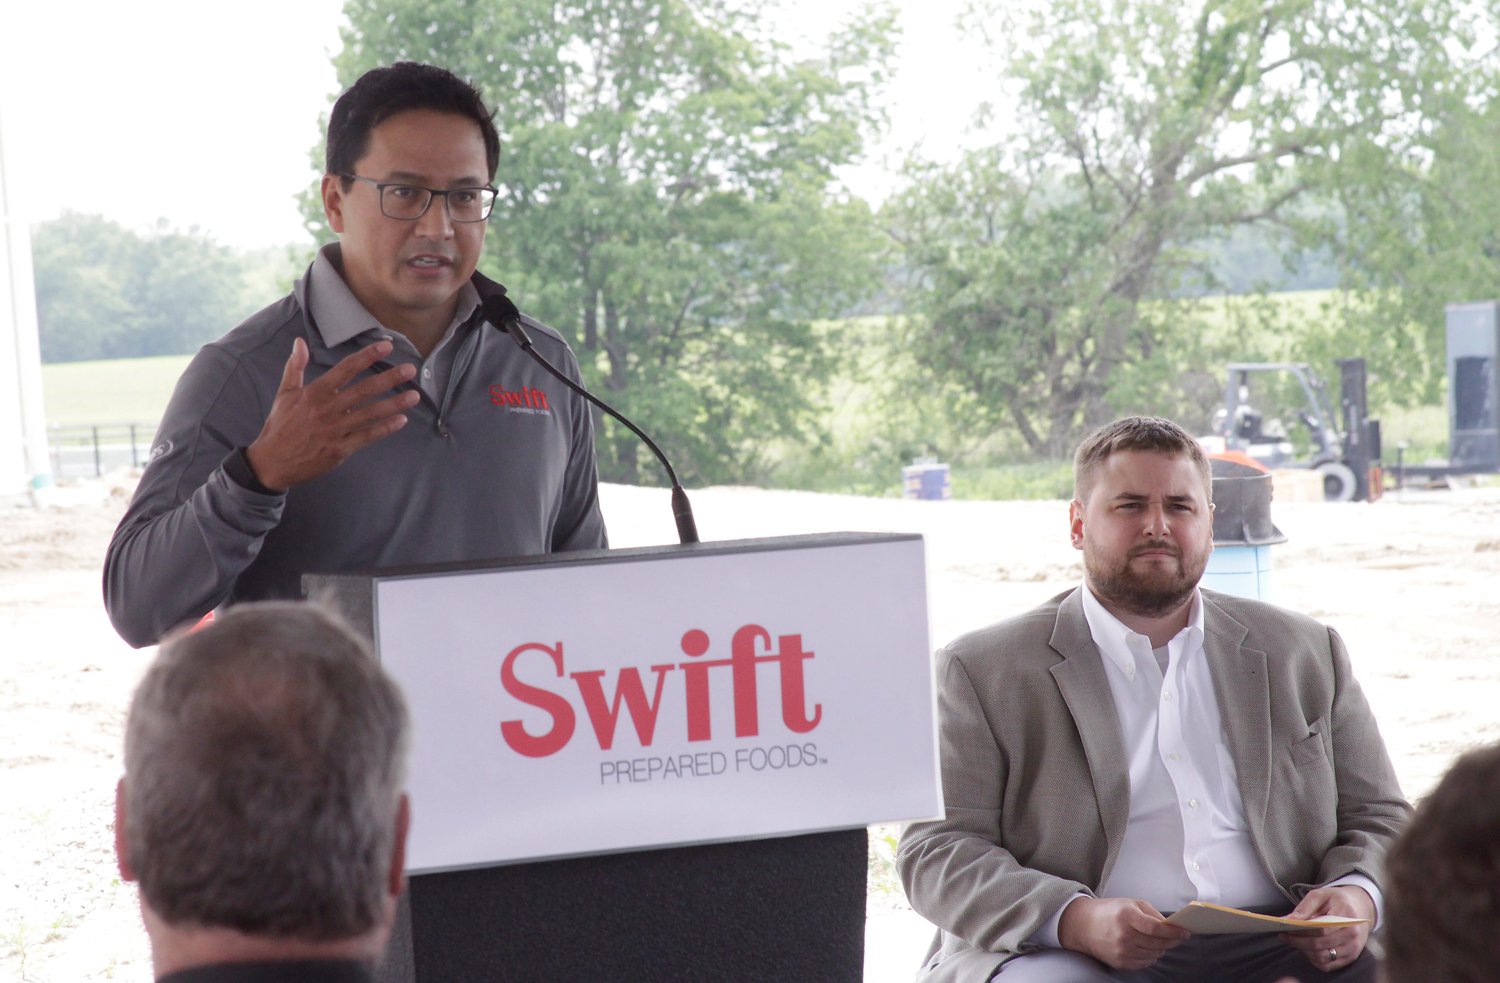 Tom Lopez, president and chief operating officer, Swift Prepared Foods, talks about company values and goals as it begins operations to produce ready-to-eat bacon products at its new facility in Moberly.  Shown seated is Moberly Area Economic Development Corporation President Michael Bugalski.